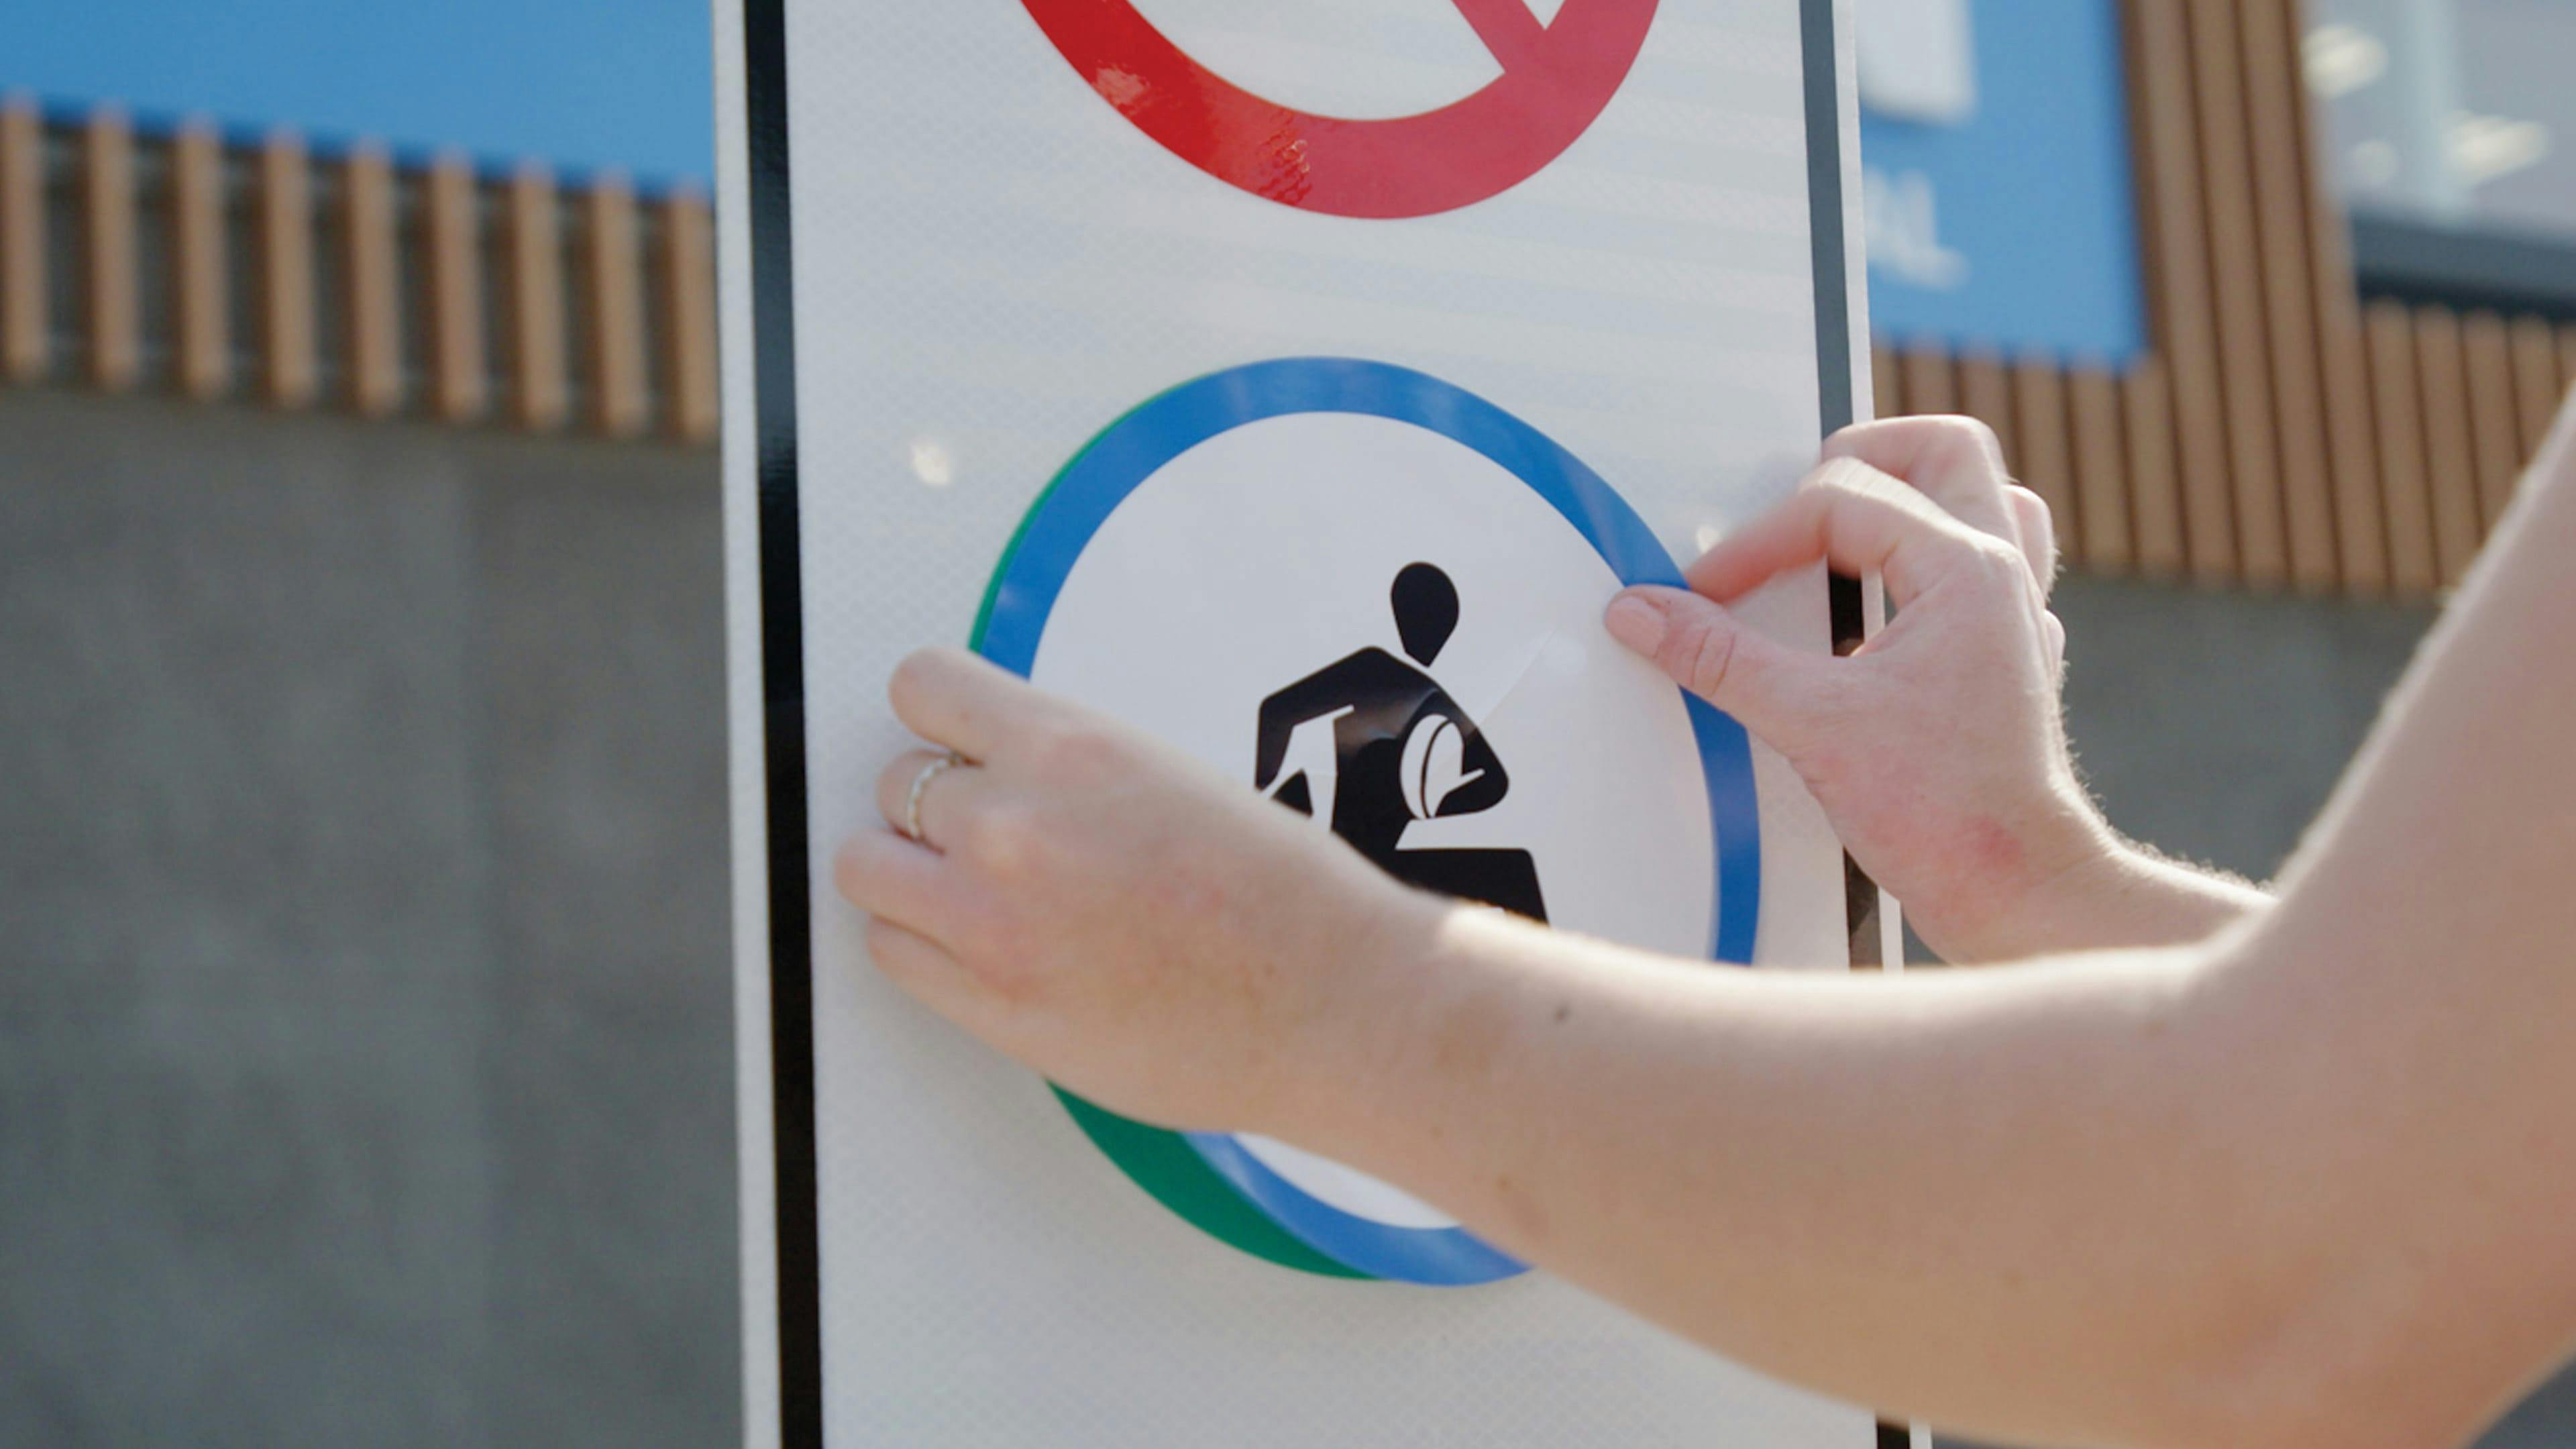 Placing an ability signs sticker on a handicap parking sign. 